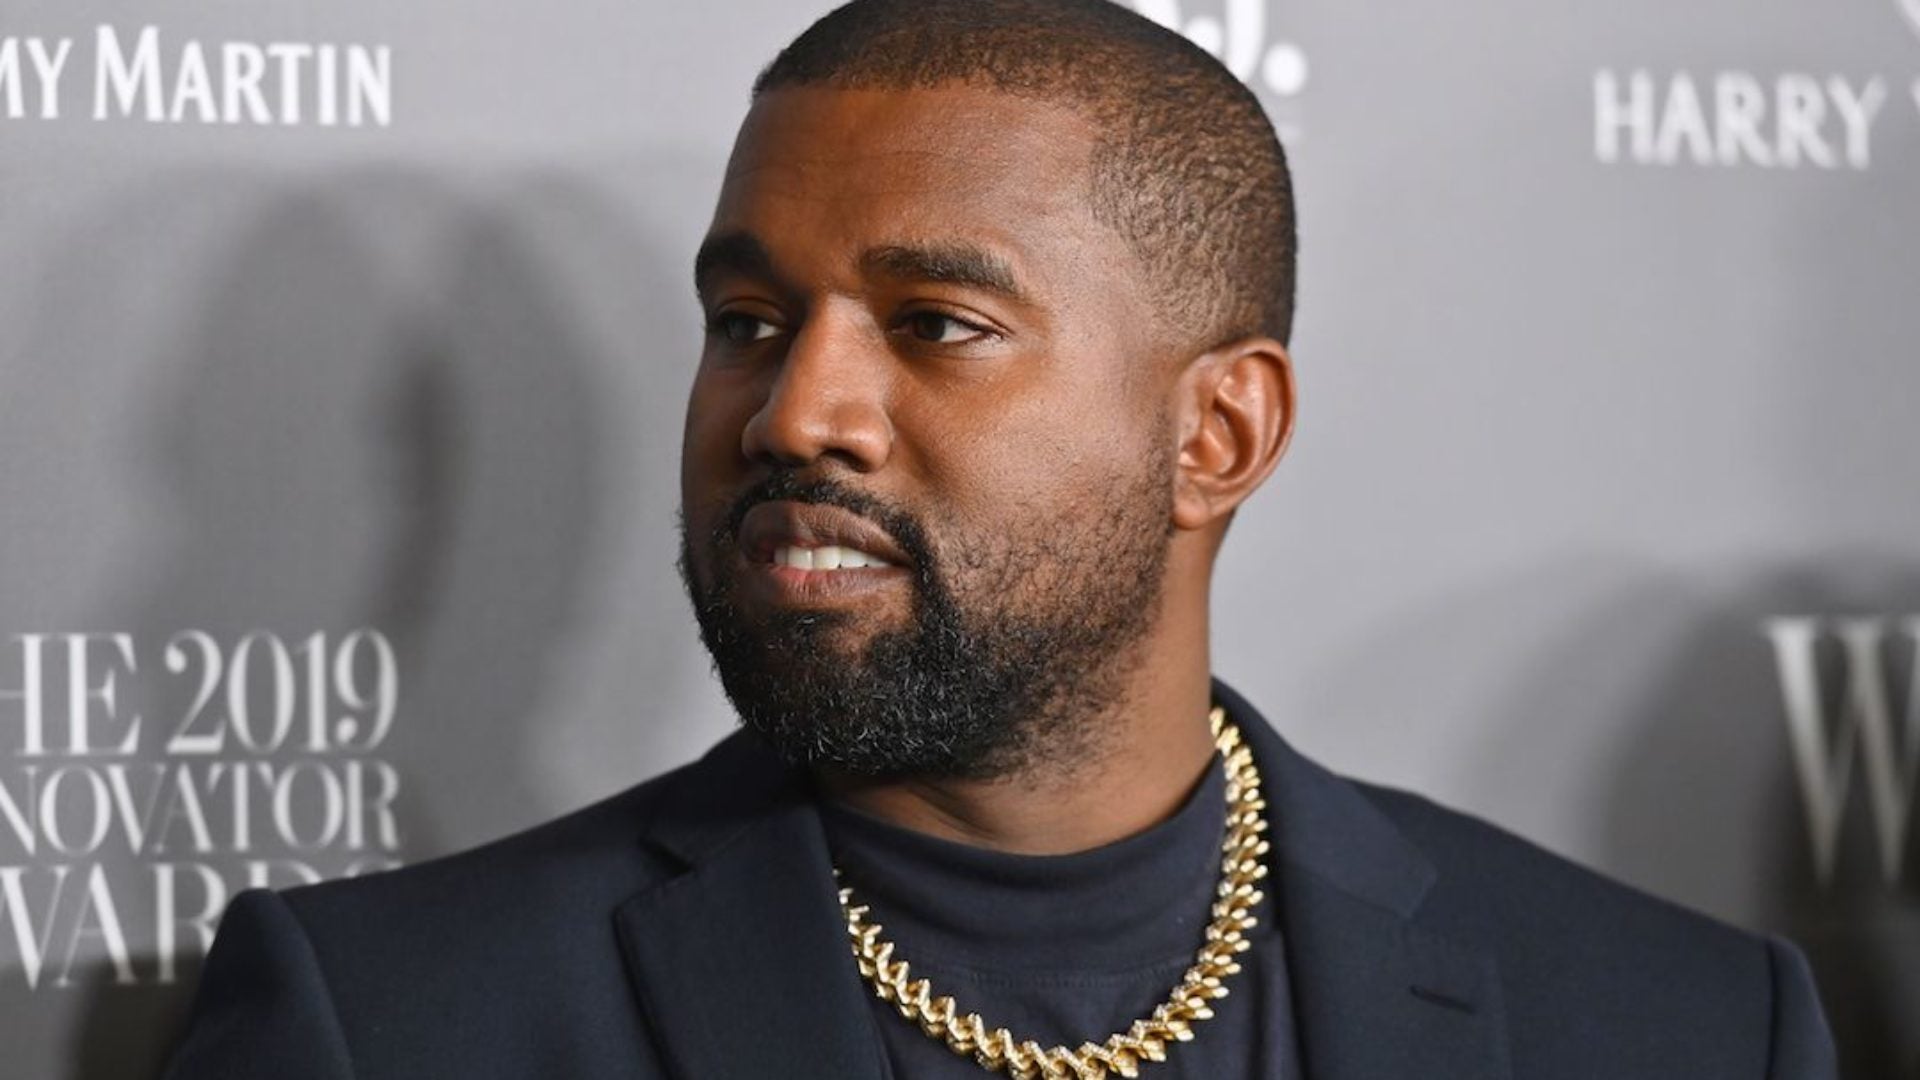 Kanye West Ordered To Stop Construction Immediately For Wyoming Amphitheater